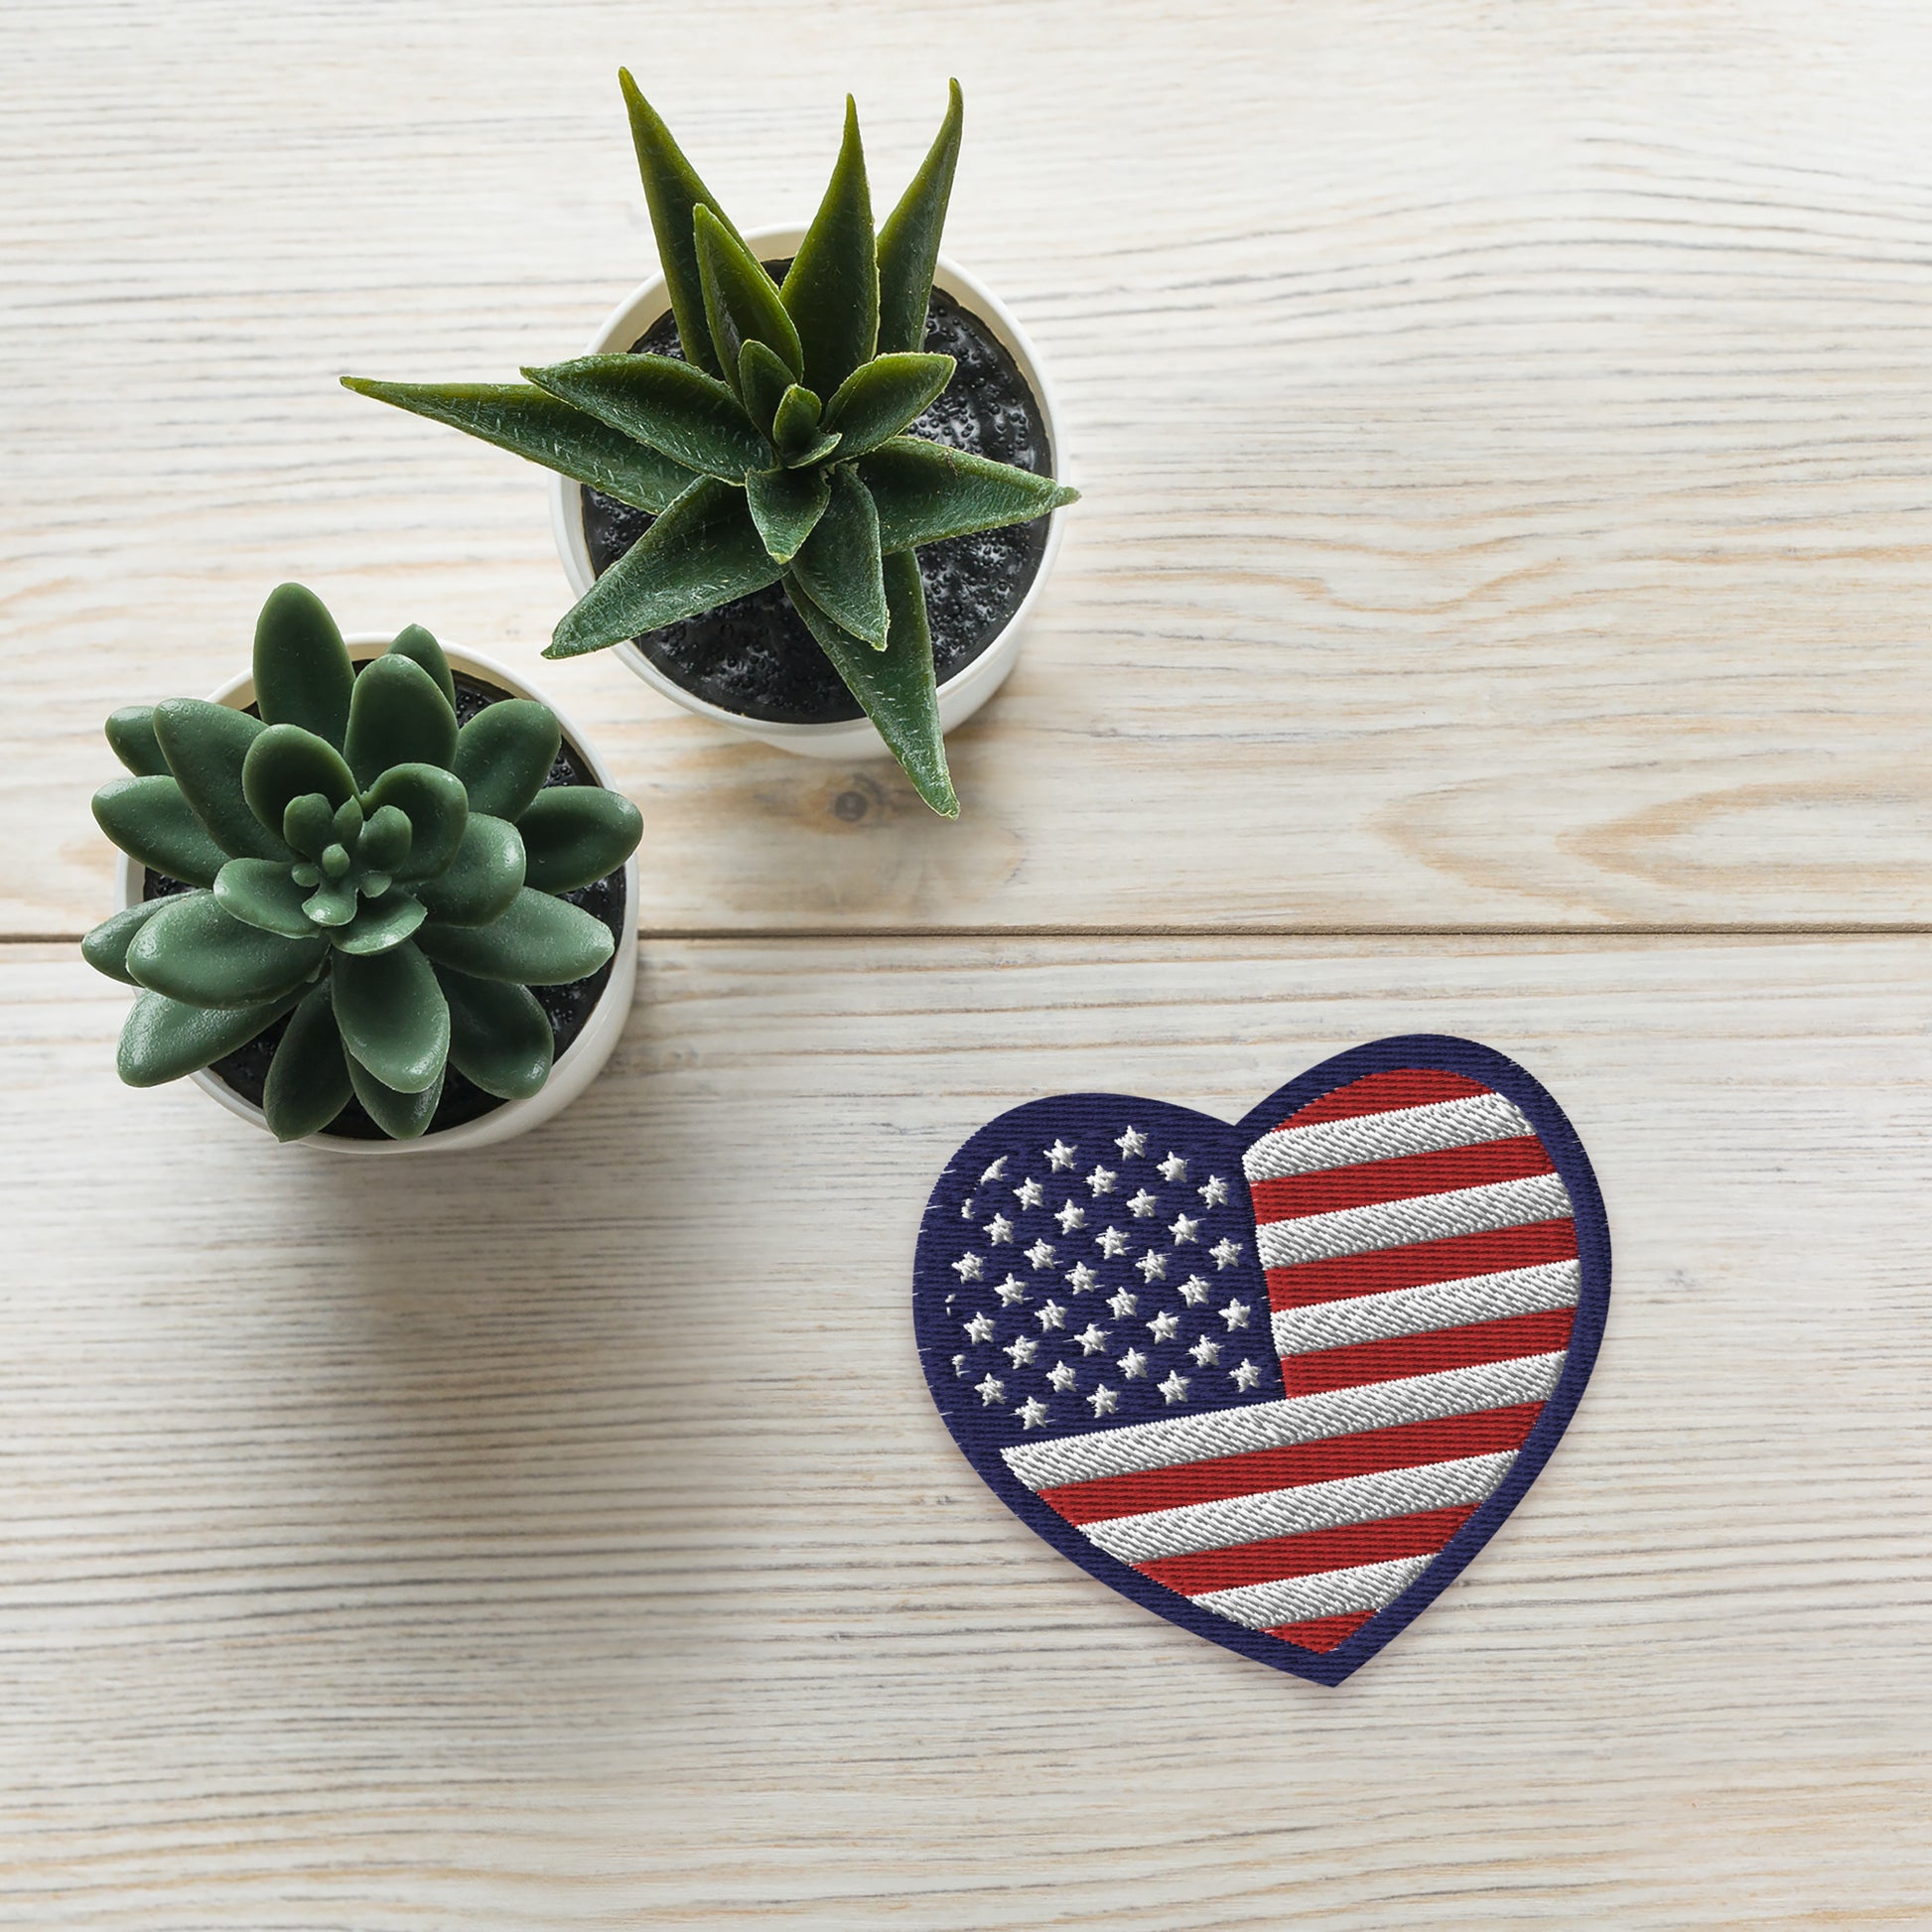 This Heart-Shaped US Flag Patch Is the Perfect Way to Show Your Love for America